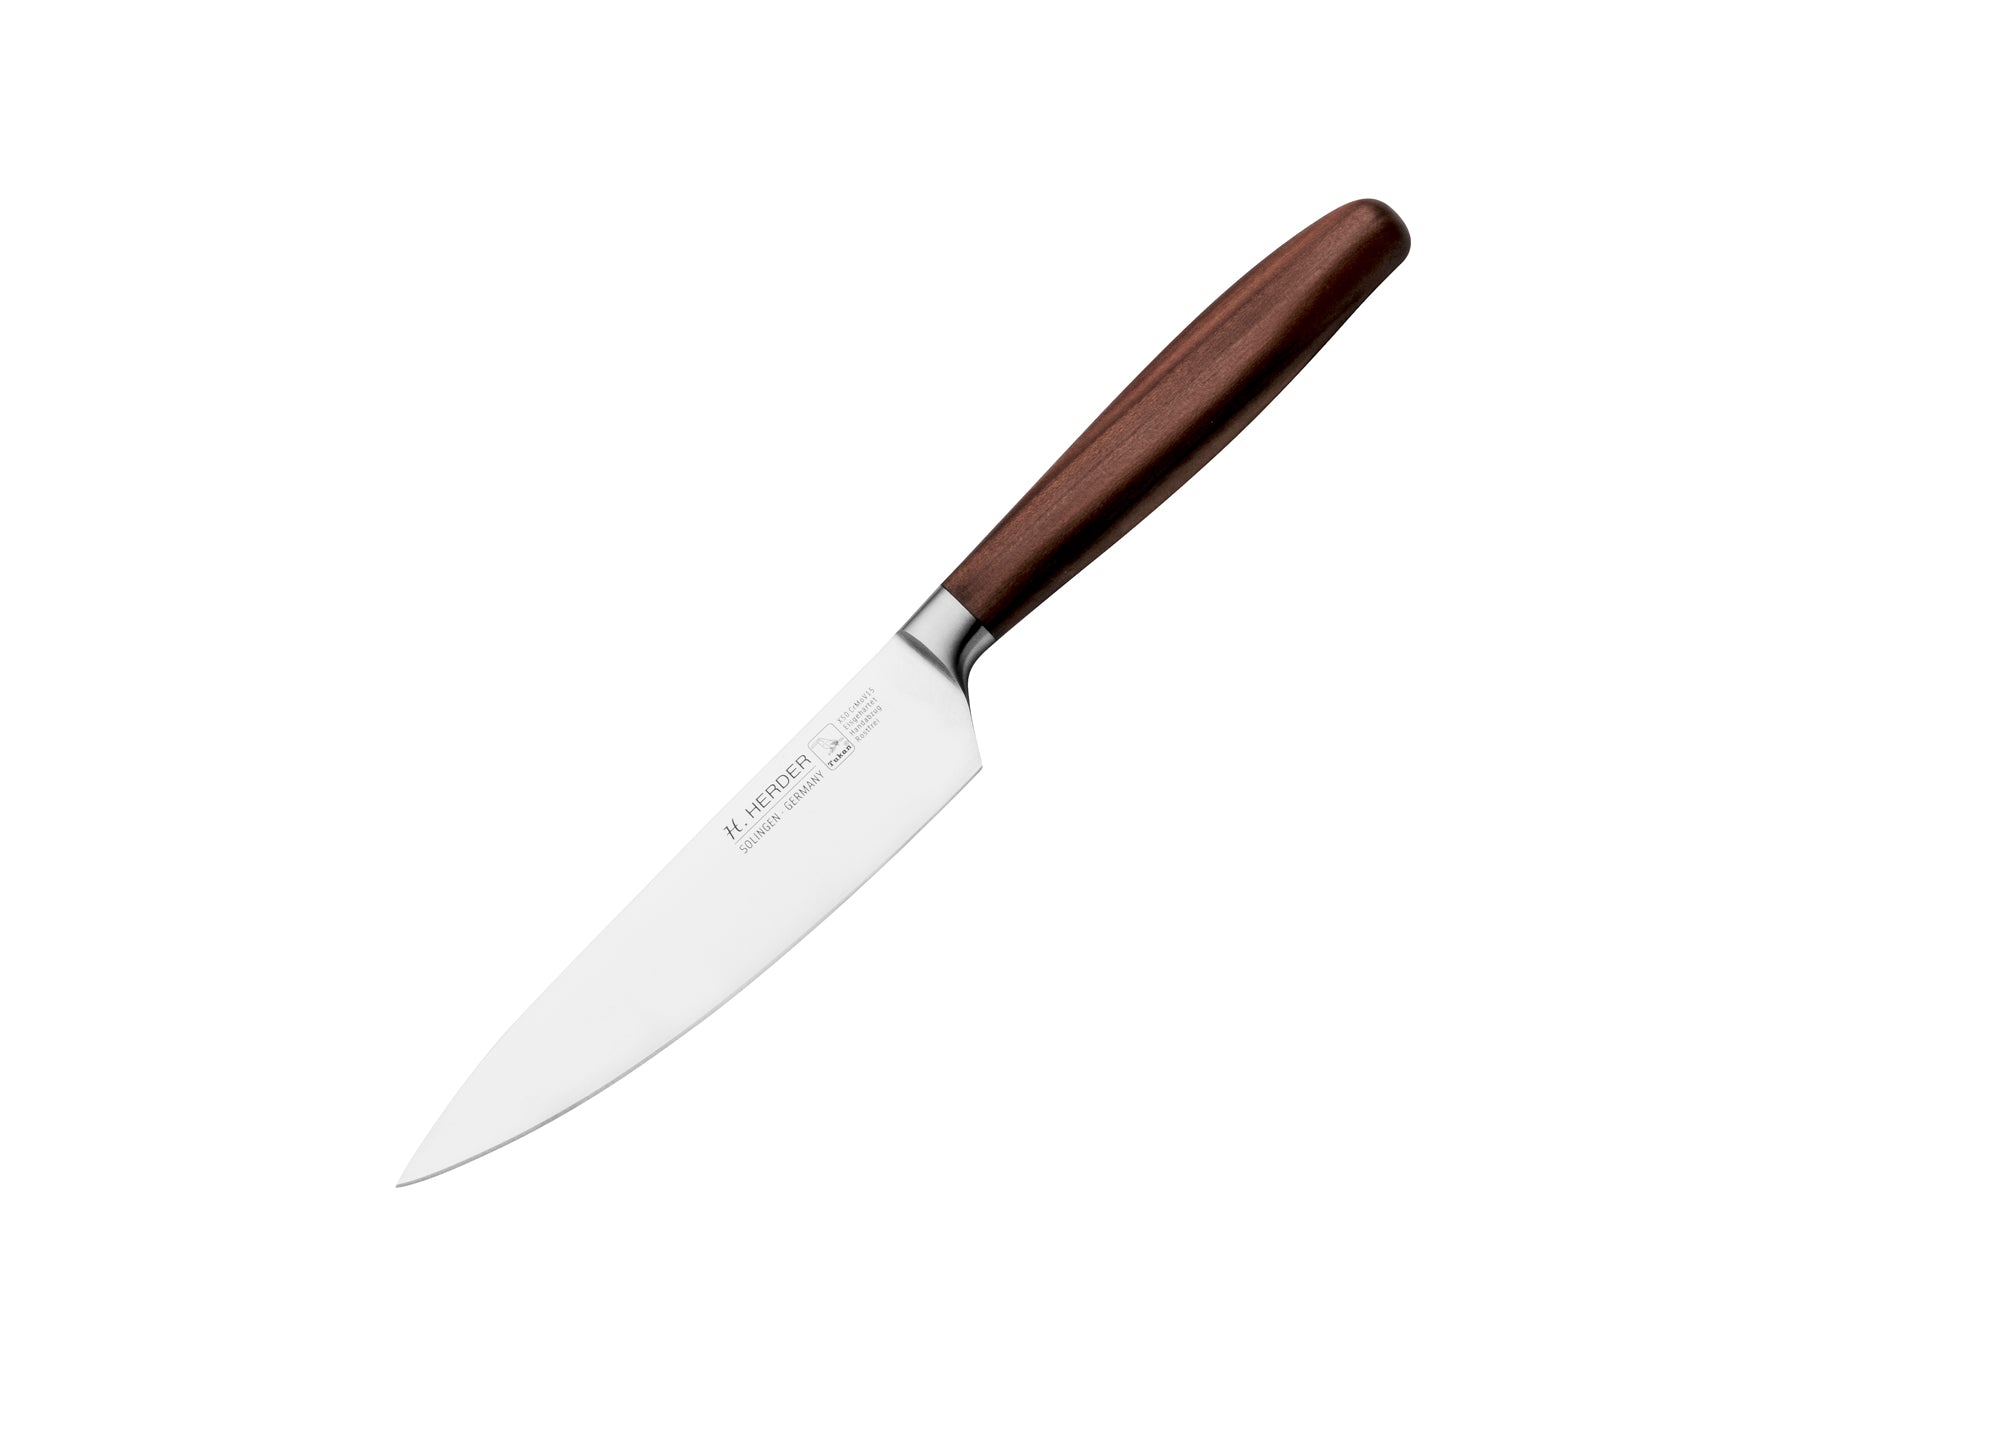 Chef's knife Eterno, plum wood, blade length 16cm, forged